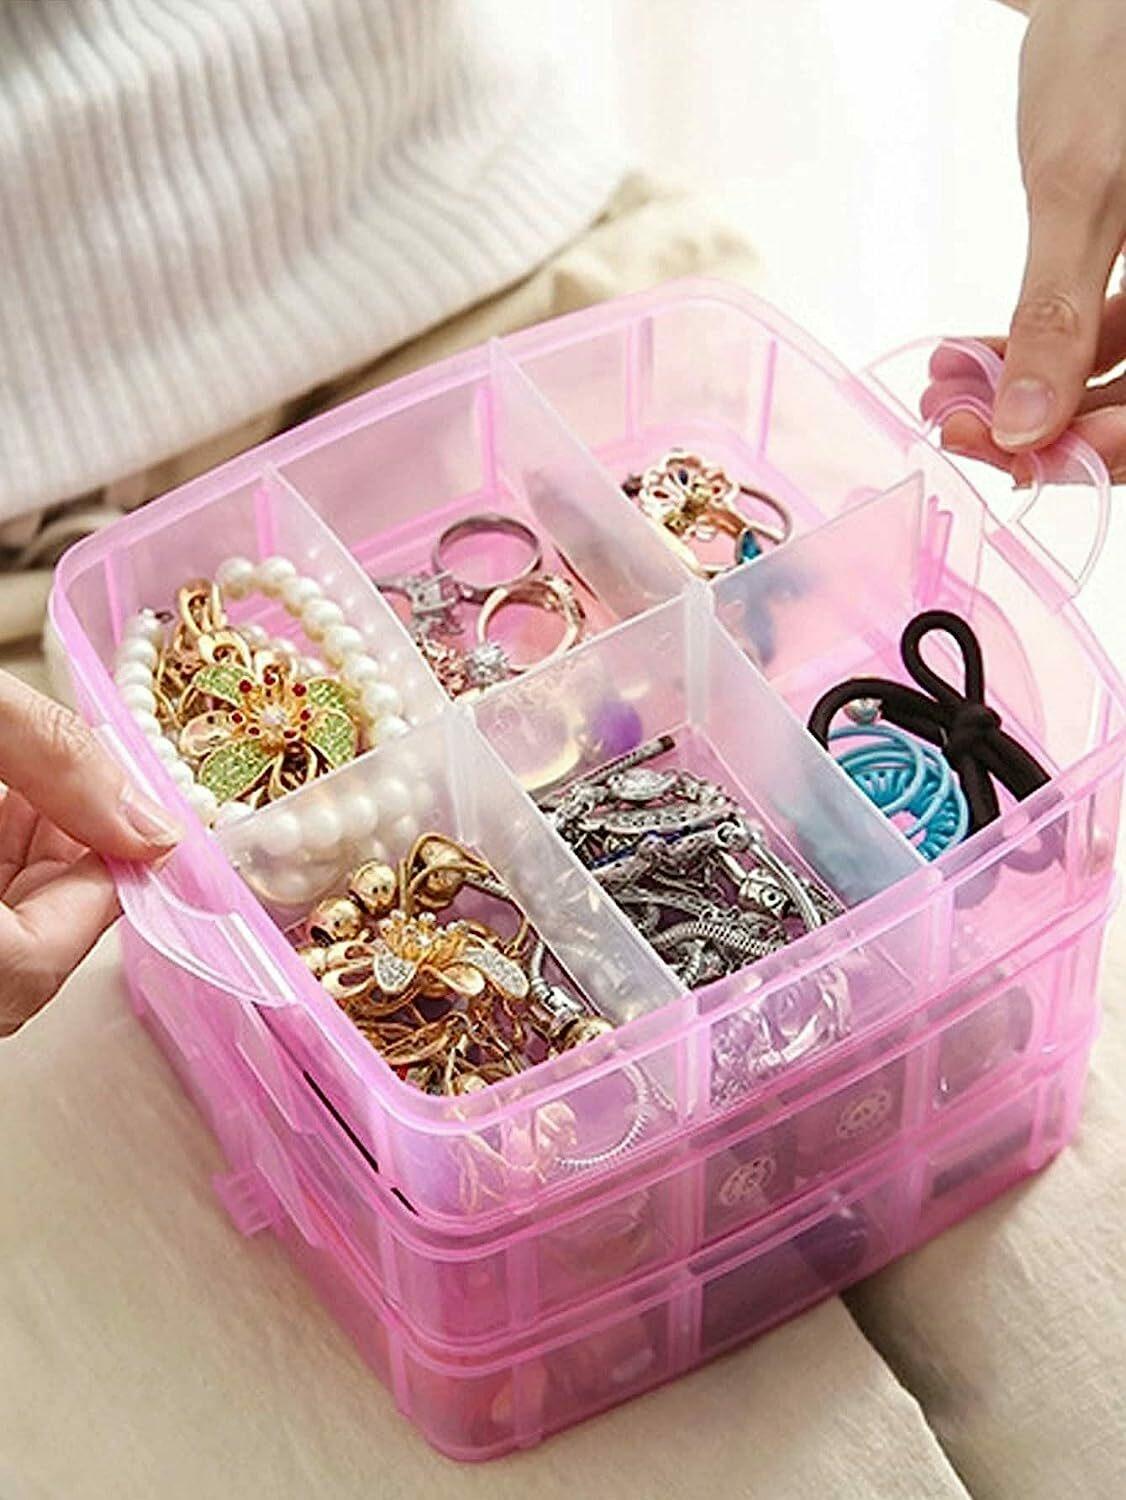 Buy Homeleven 3 Layer 18 Grids Plastic Jewellery Box, Makeup Box